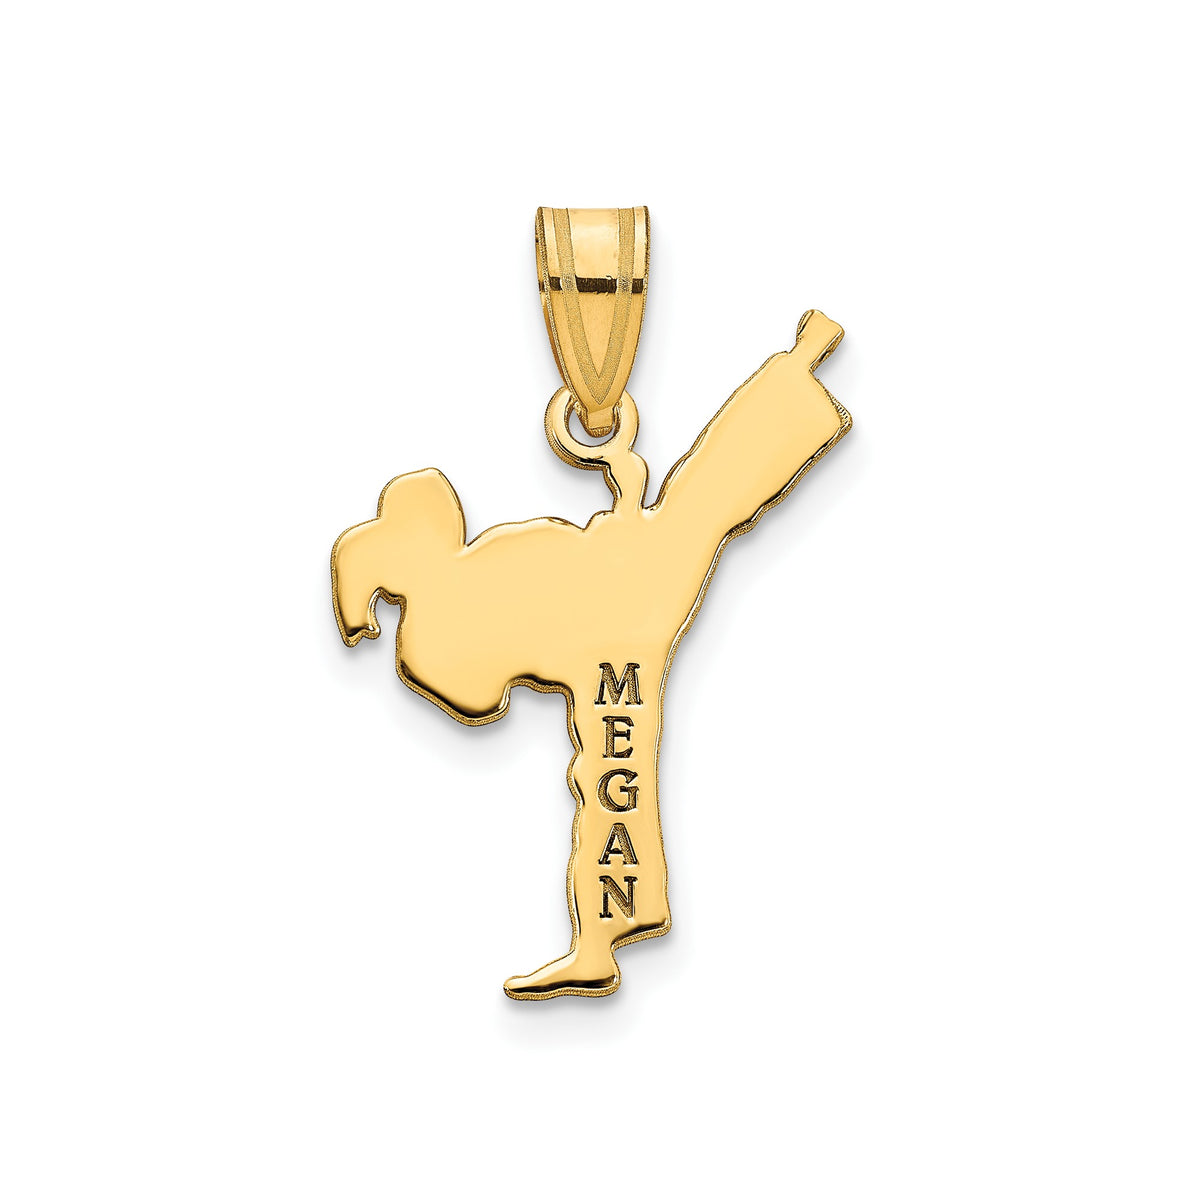 Personalized Karate Pendant Man or Woman  w/ Name & Necklace included  in Sterling Silver or Gold Plated Sterling Silver